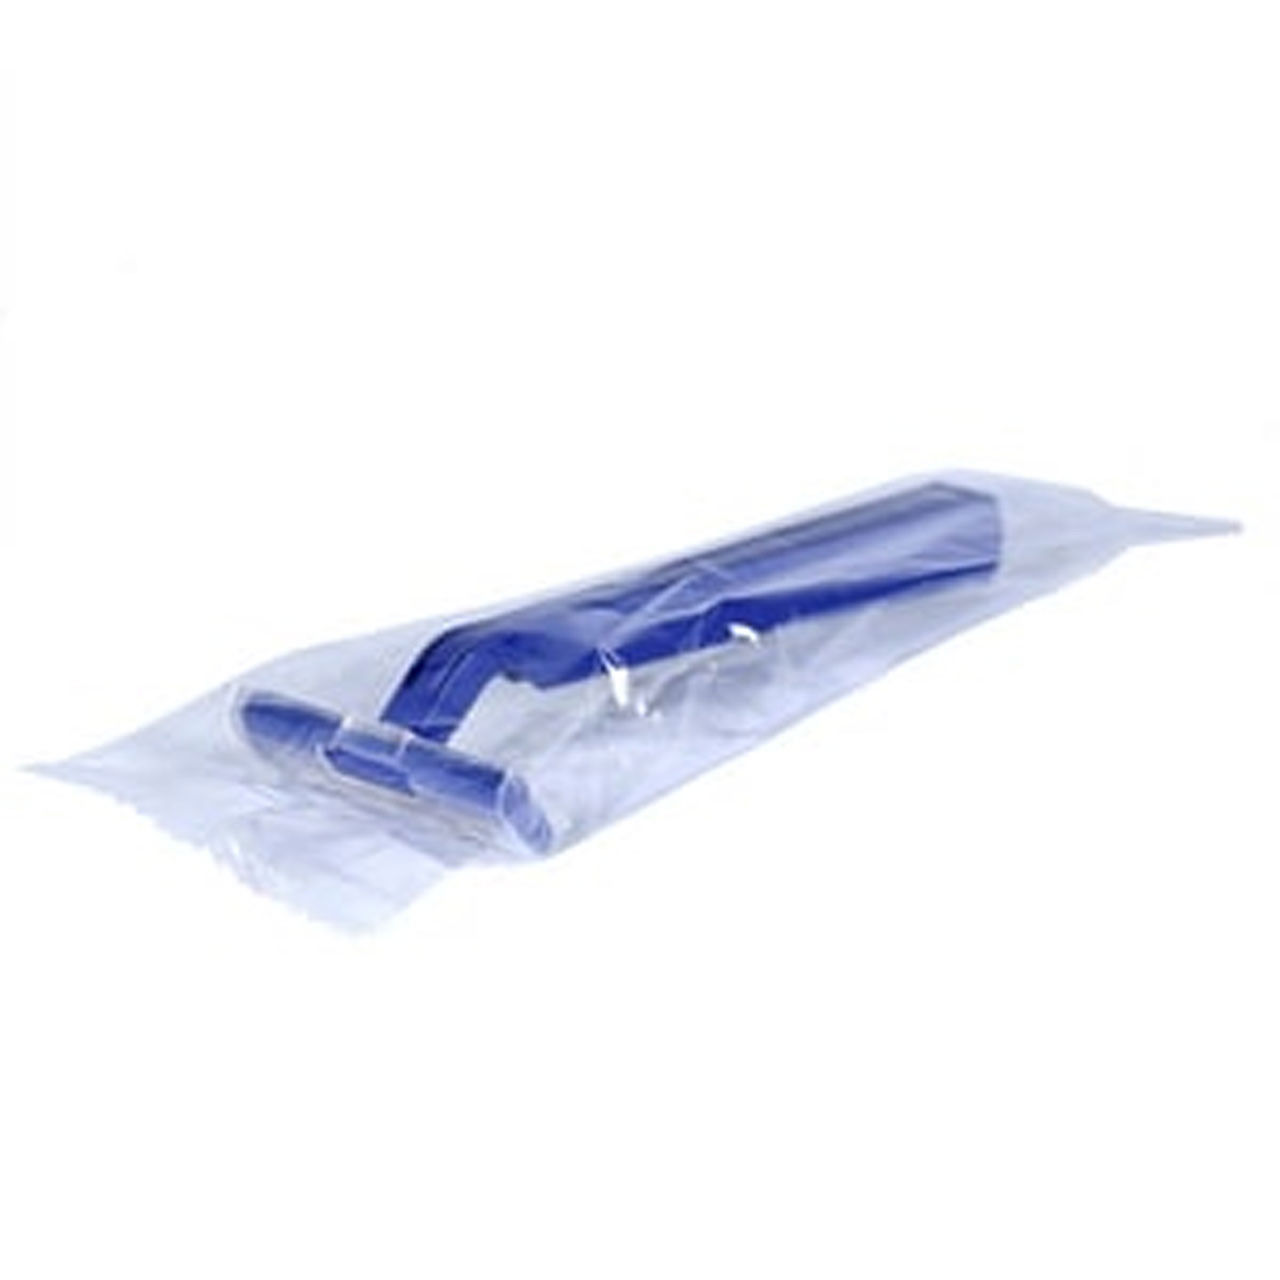 Who would find bulk razors wholesale ideal to purchase?